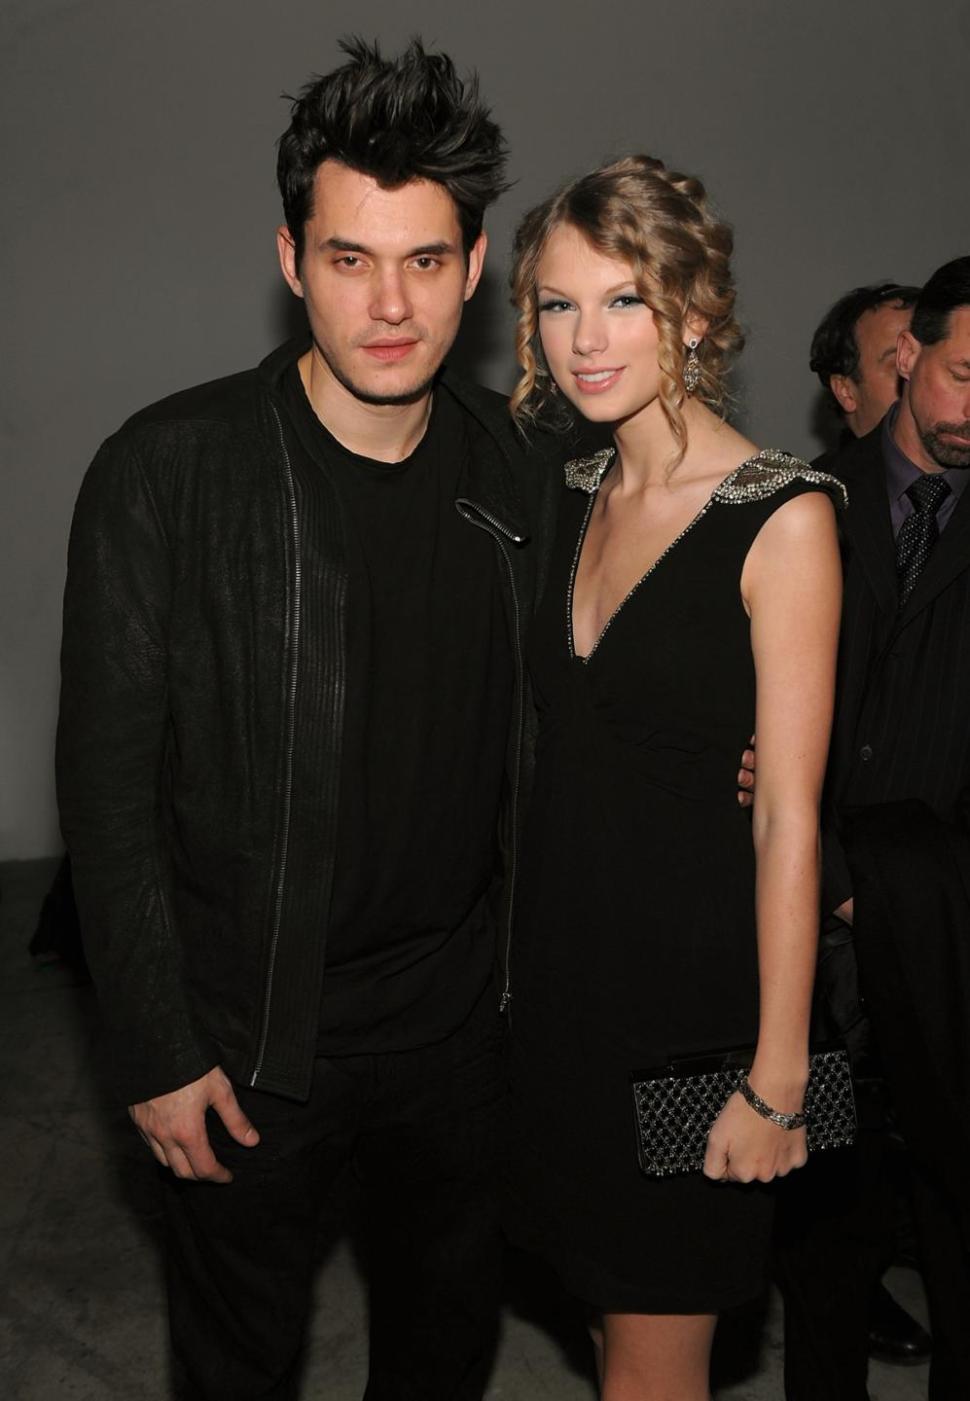 John Mayer (l.) and Taylor Swift attend a VEVO launch event in 2009.